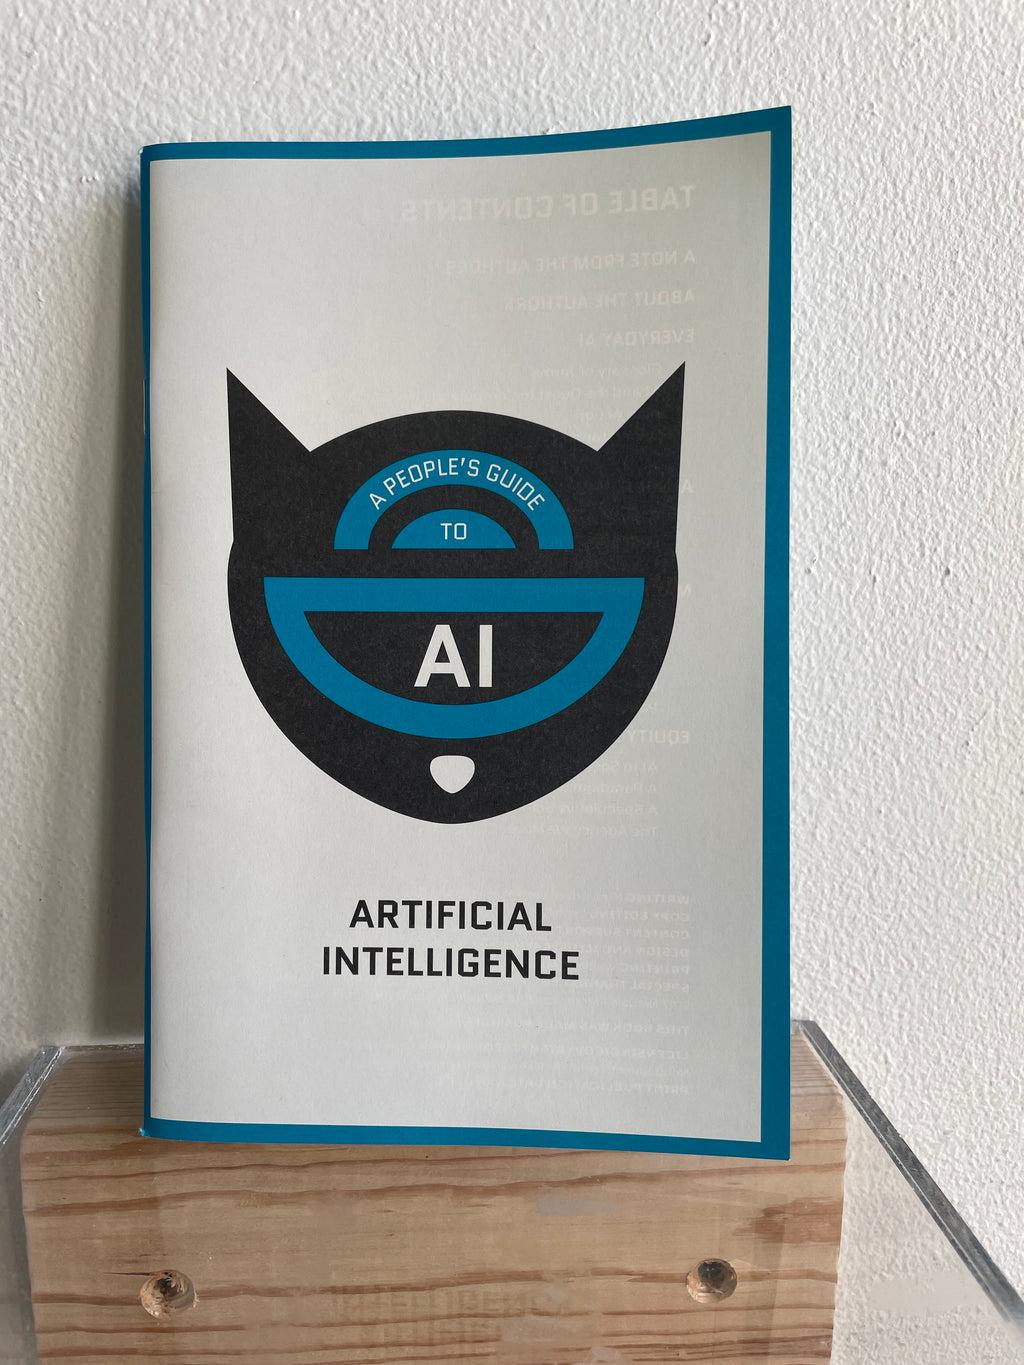 A People's Guide to Artificial Intelligence